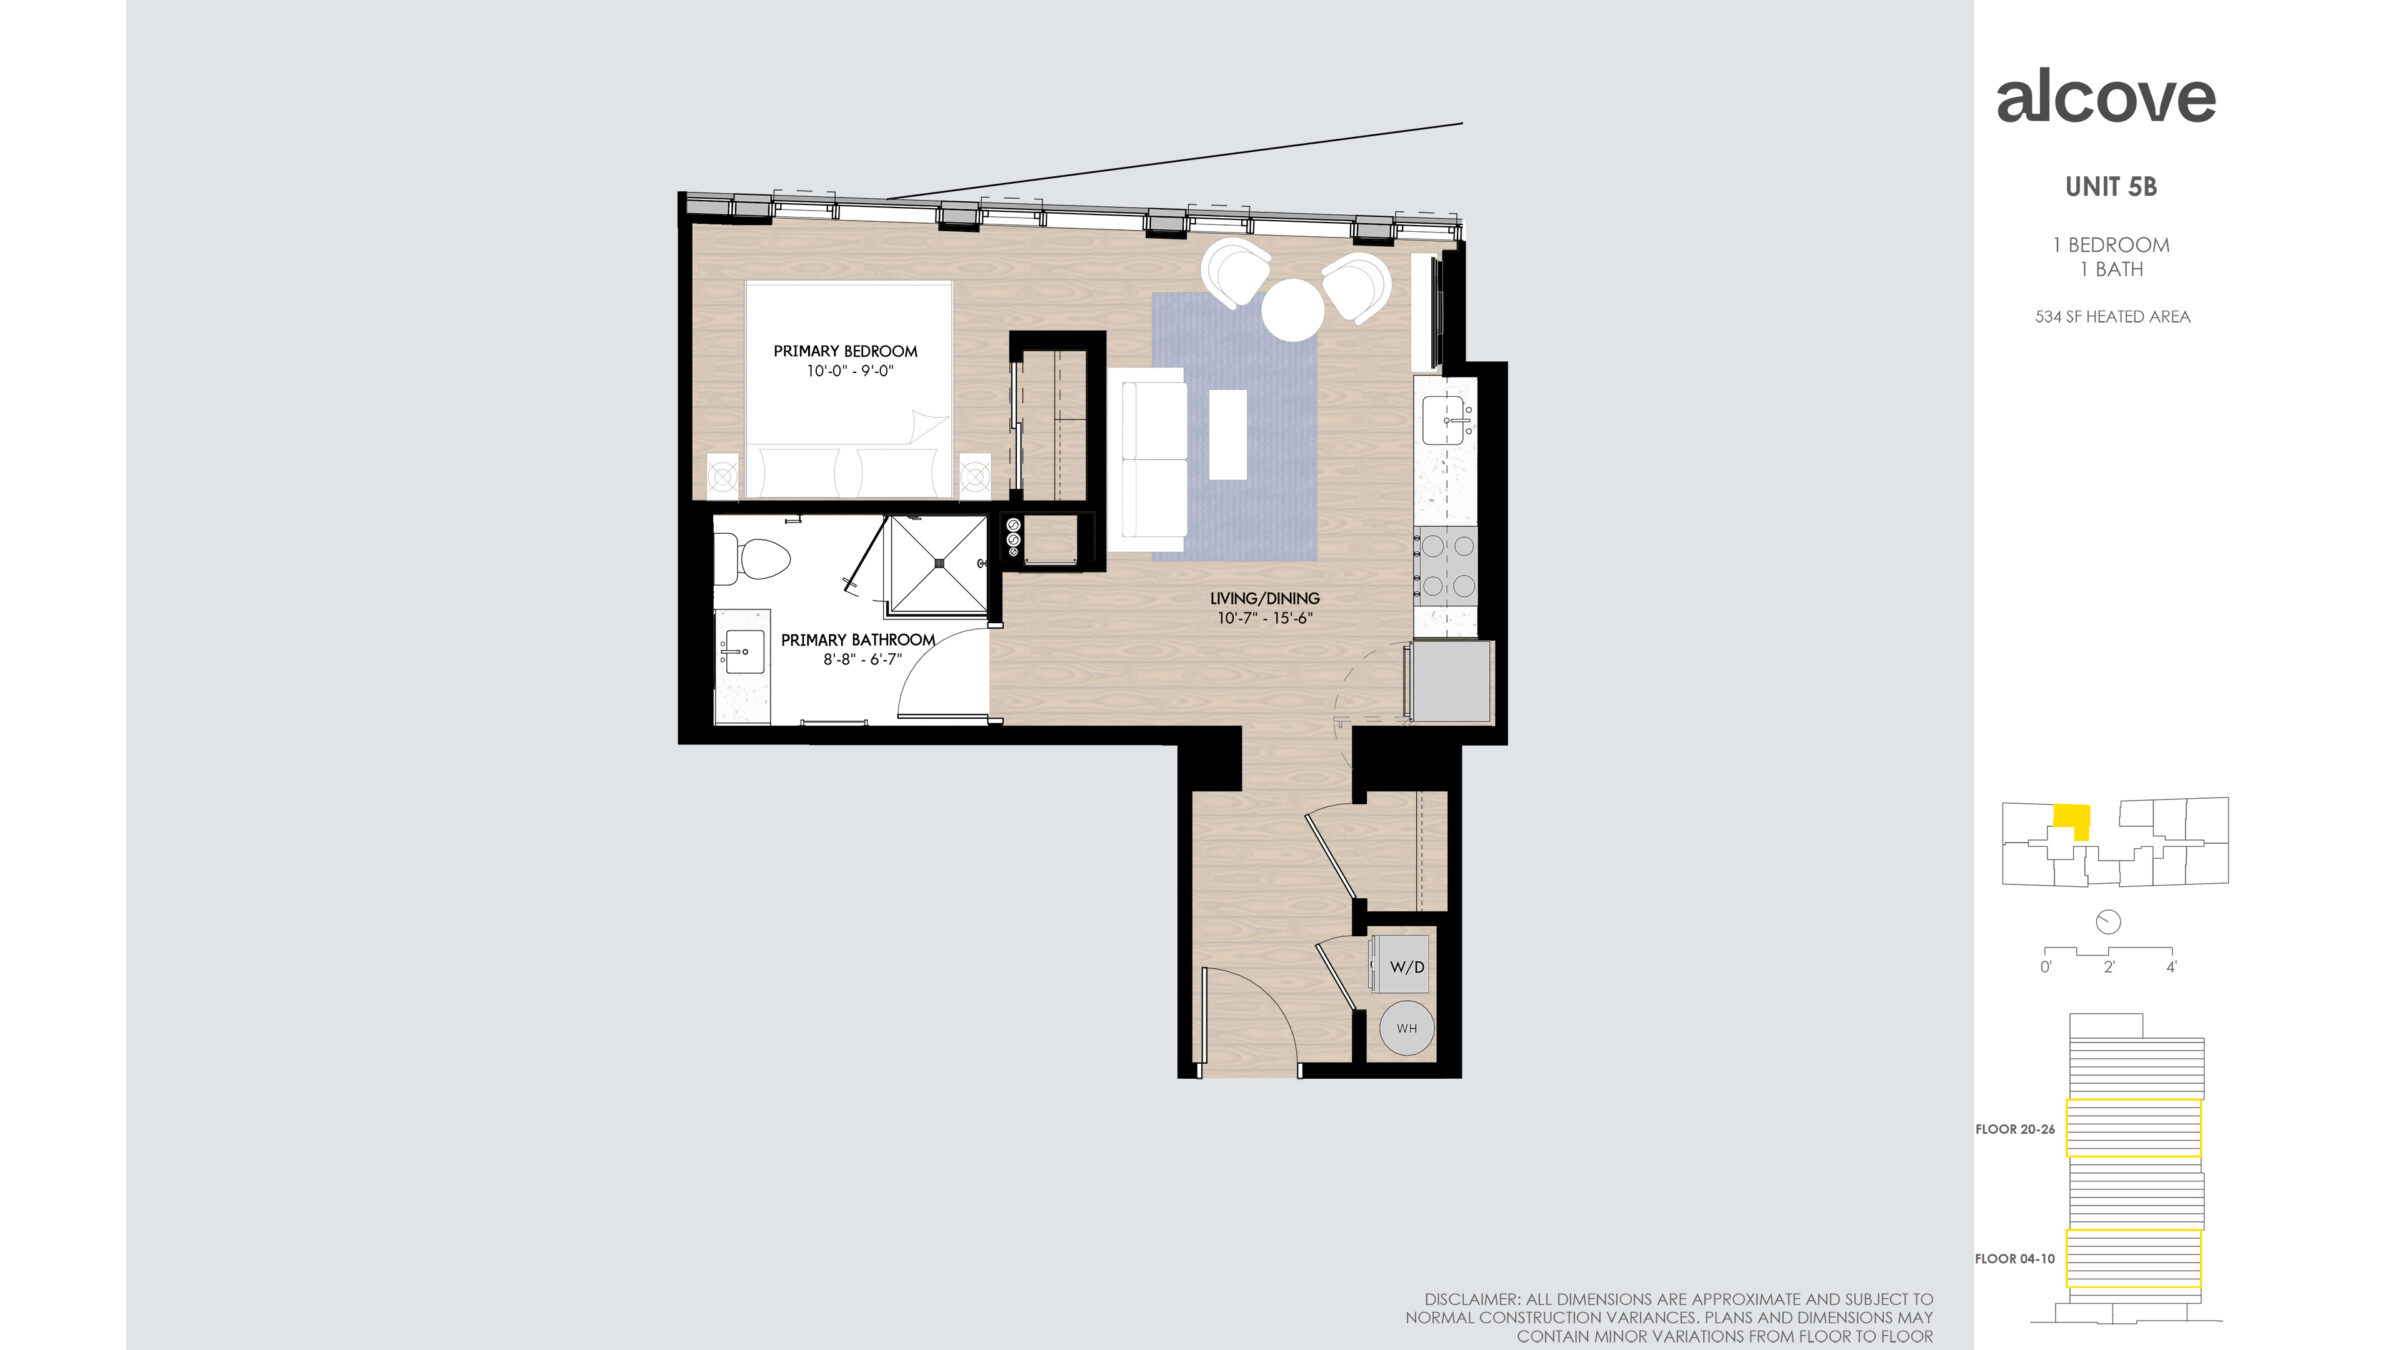 Image reads: UNIT 5B 1 BEDROOM 1 BATH 534 SF HEATED AREA Floor 20-26  Floor 04-10  Disclaimer: all dimensions are approximate and subject to normal construction variances. Plans and dimensions may contain minor variations from floor to floor. 